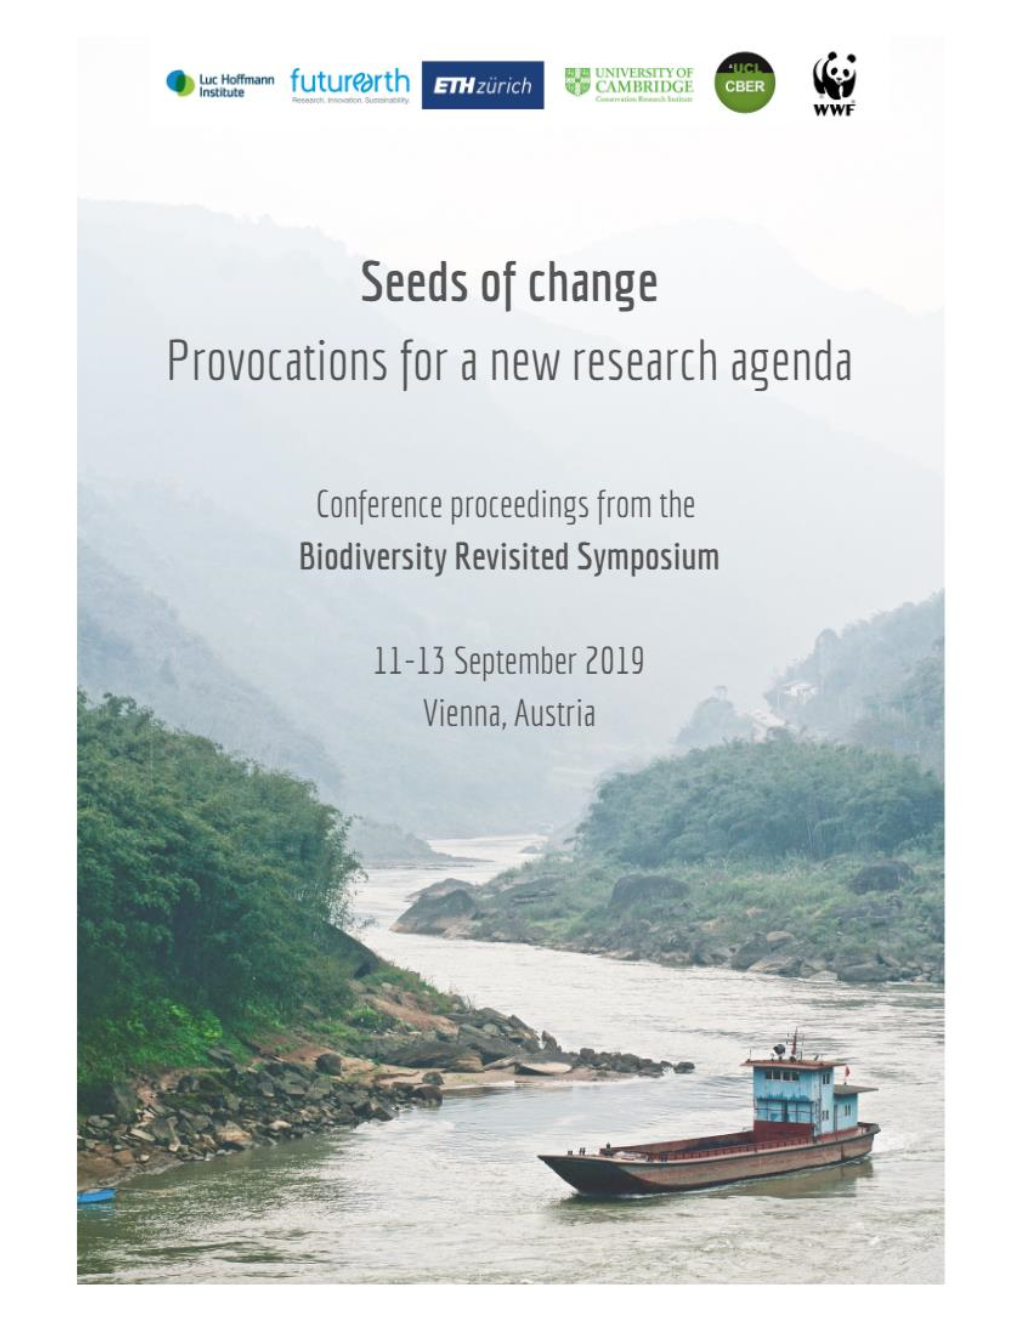 Seeds of Change: Provocations for a New Research Agenda’, Biodiversity Revisited Symposium Conference Proceedings, 11-13 September 2019, Vienna, Austria